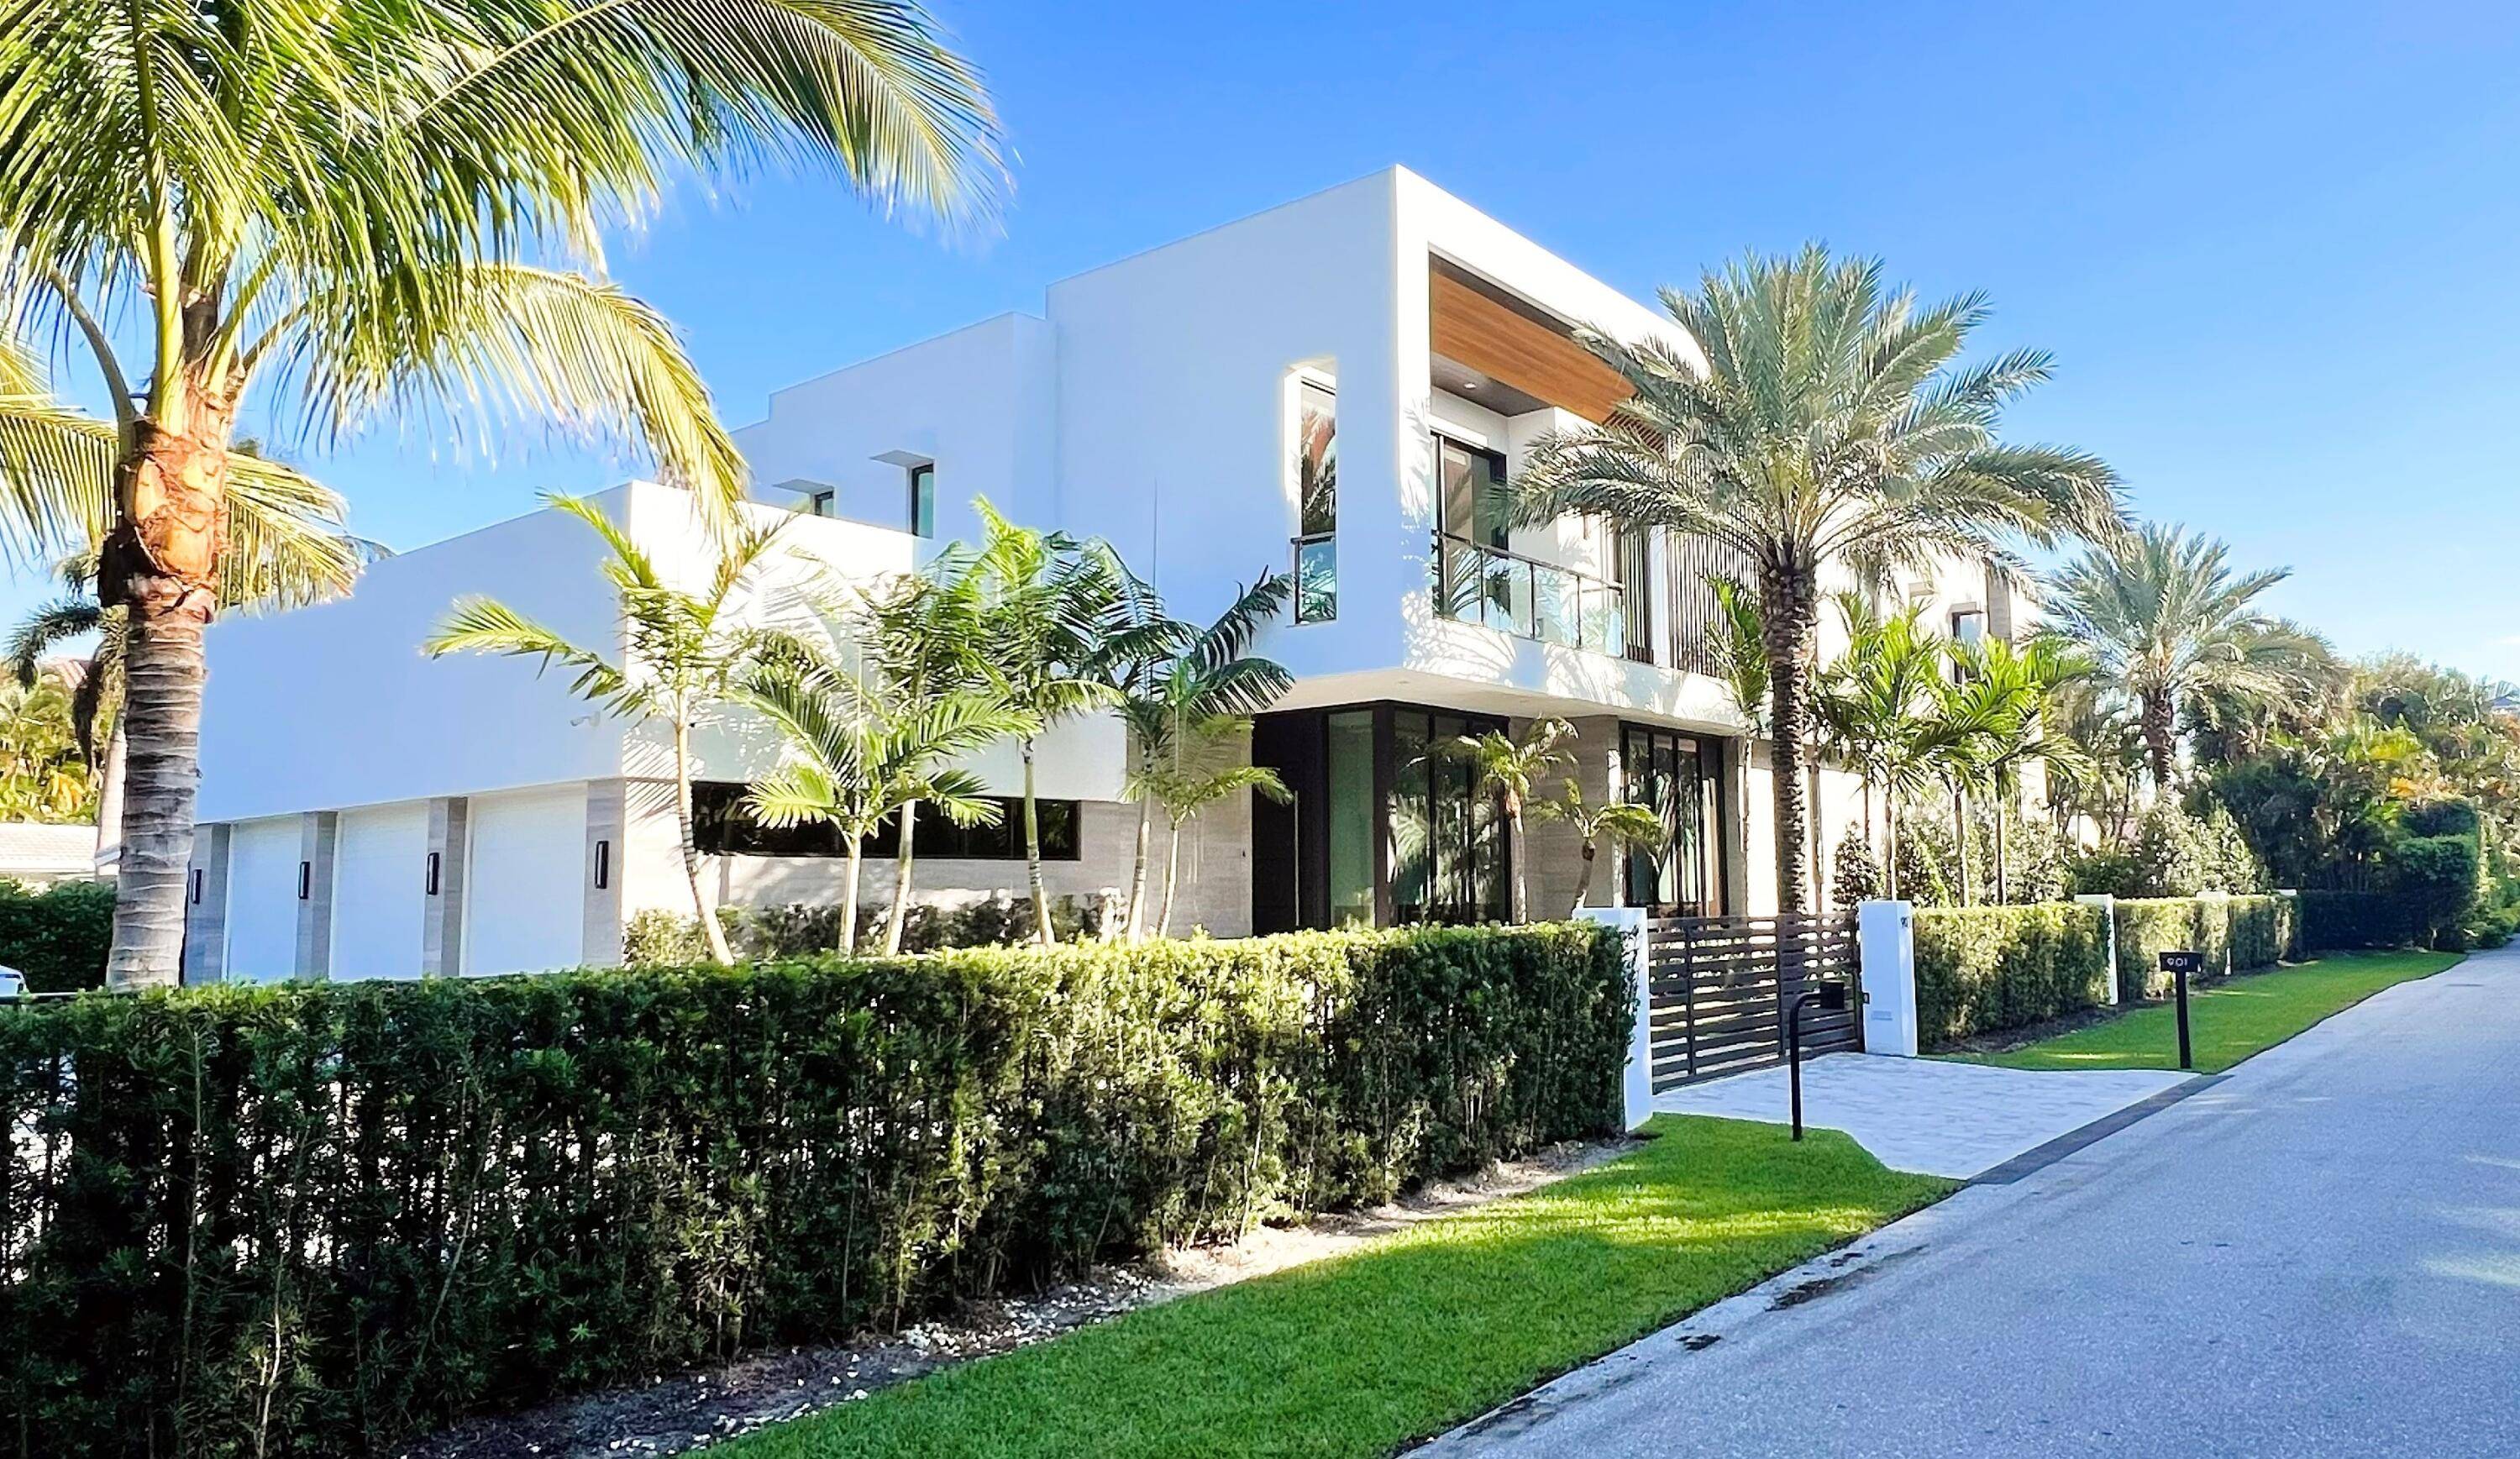 Exquisite Delray Beach Private Gate Guarded Contemporary Waterfront Estate Perfectly Set On A Secluded Canal With Picturesque Intracoastal Views.